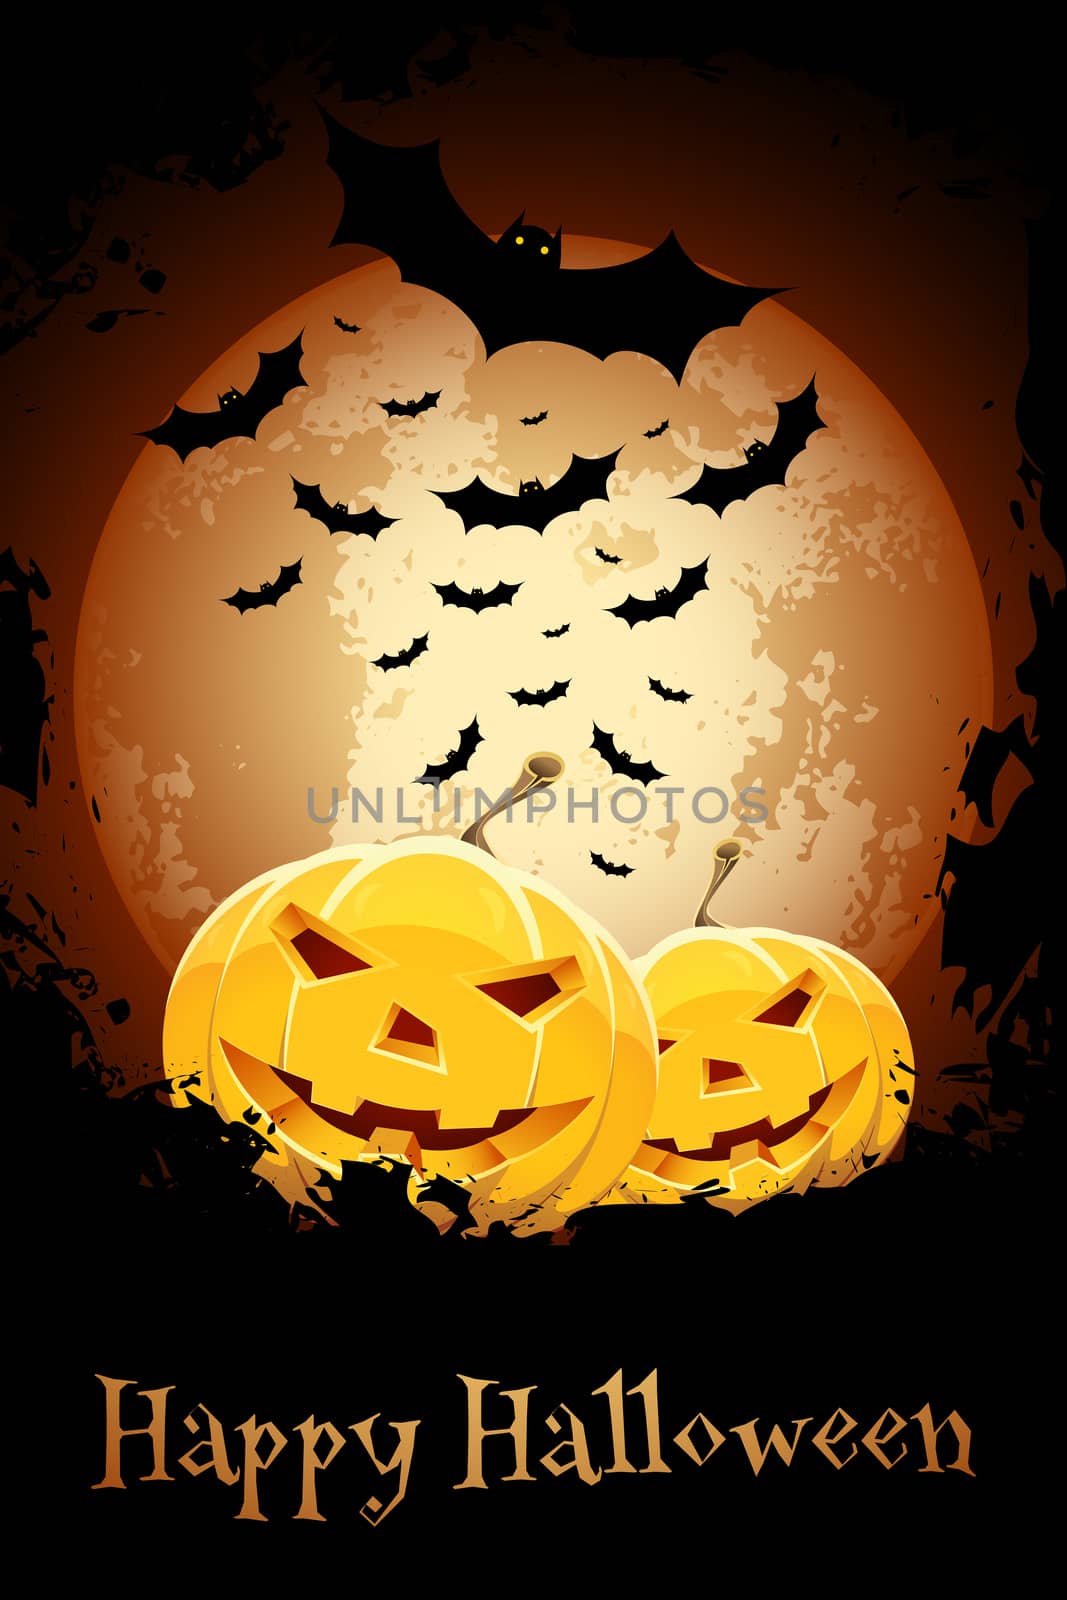 Happy Halloween Poster. Grungy Illustration with Bats and Pumpkins.